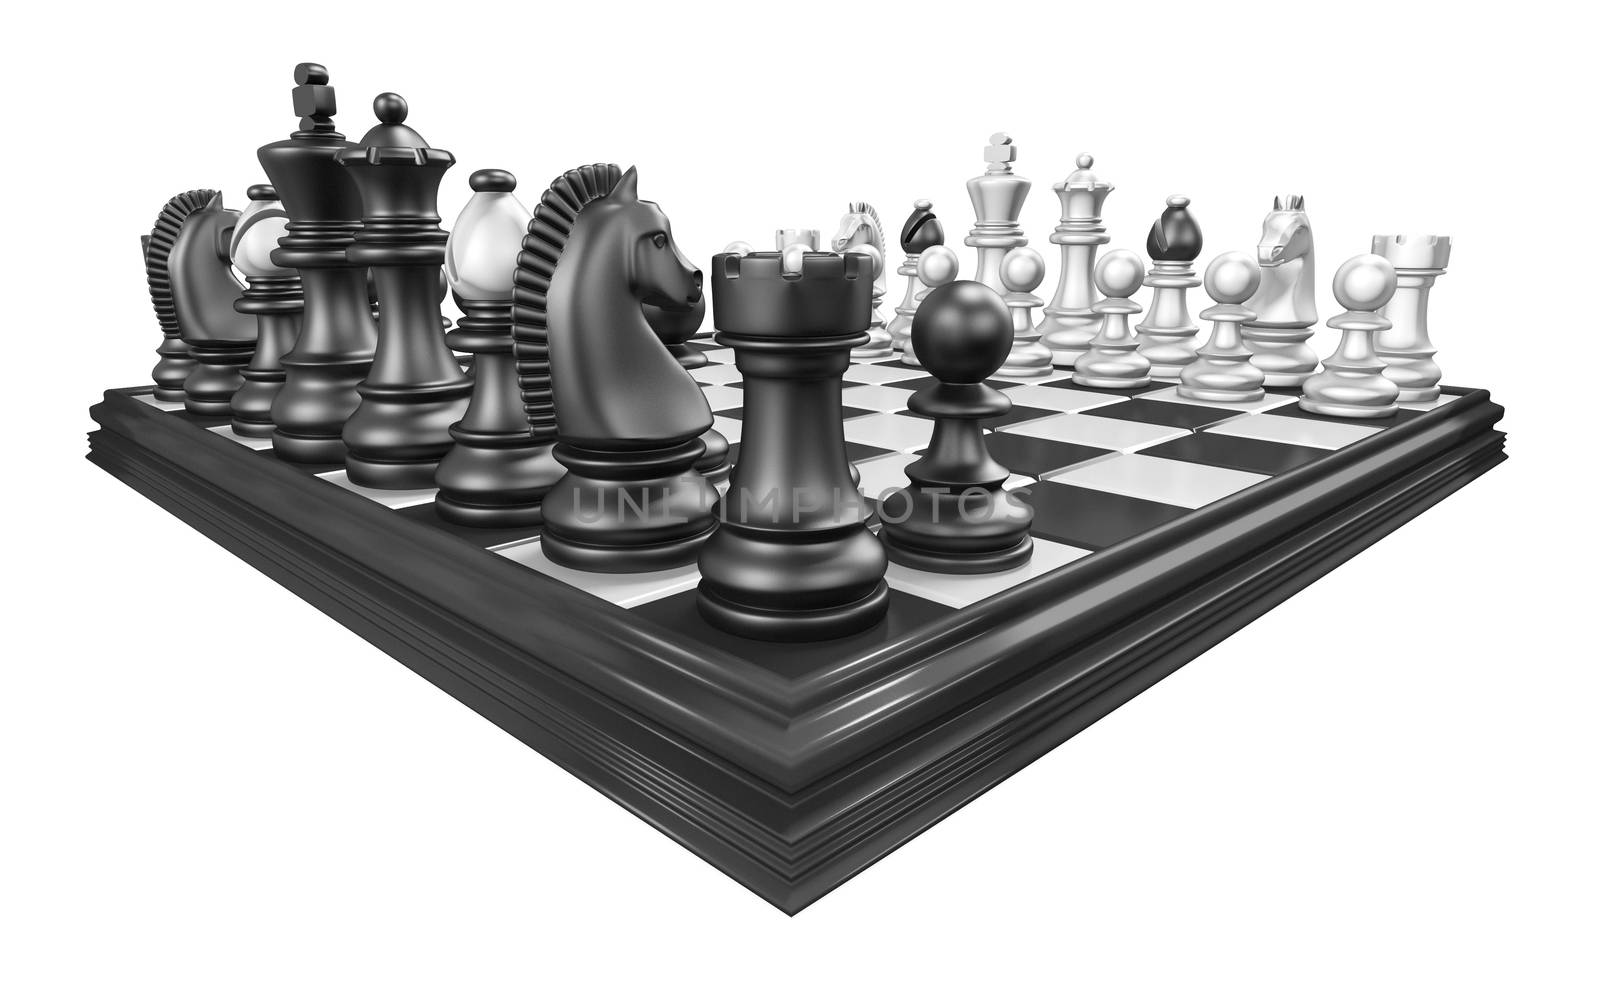 Chess board with all chess pieces 3D render illustration isolated on white background